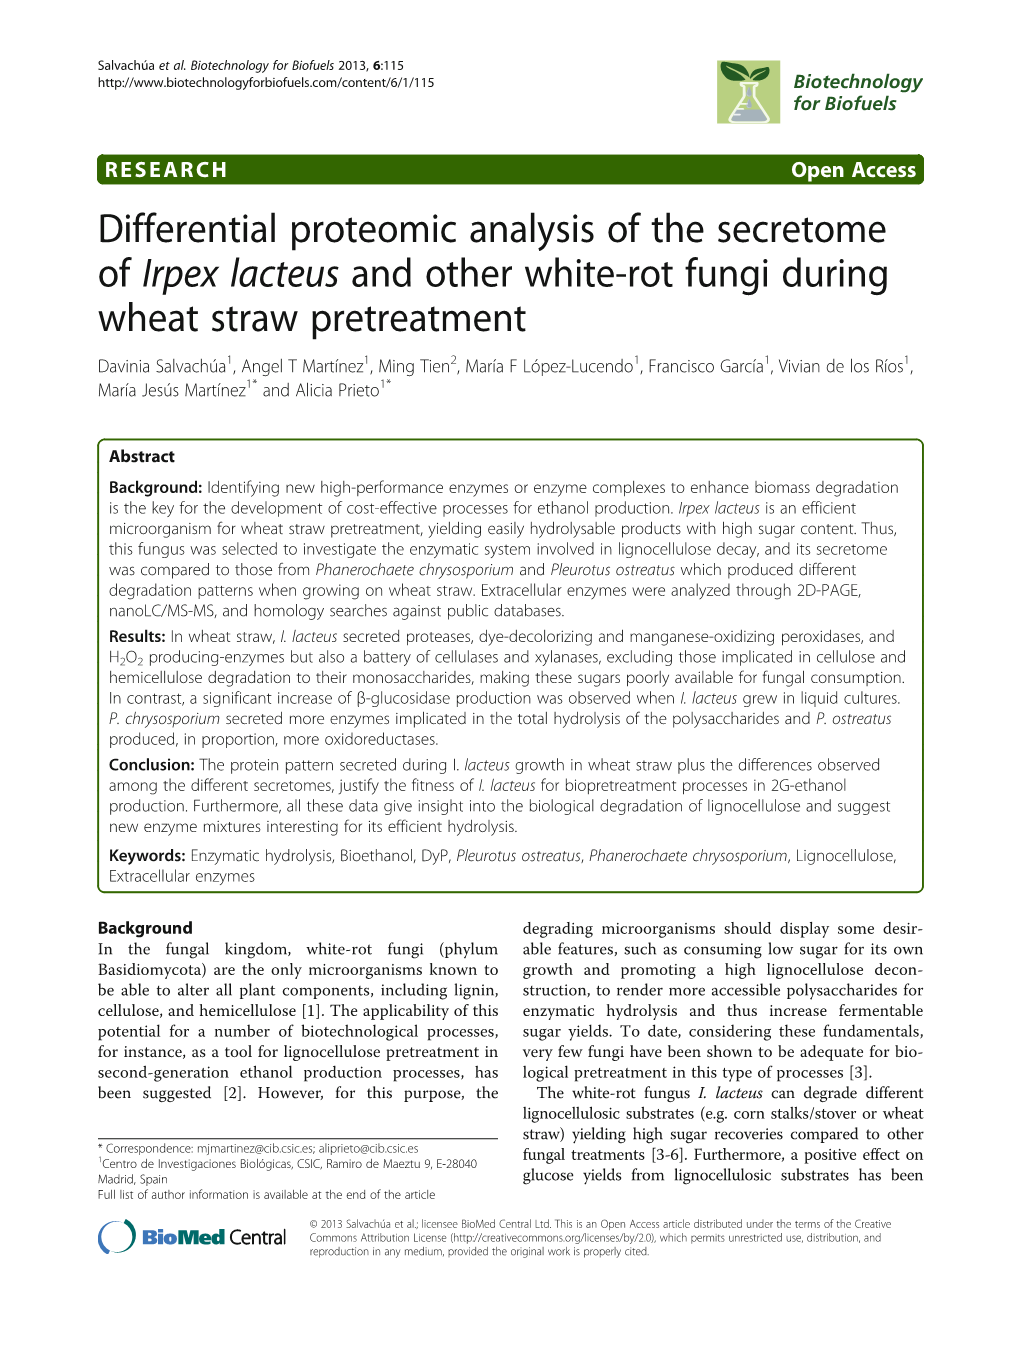 Differential Proteomic Analysis of the Secretome of Irpex Lacteus And